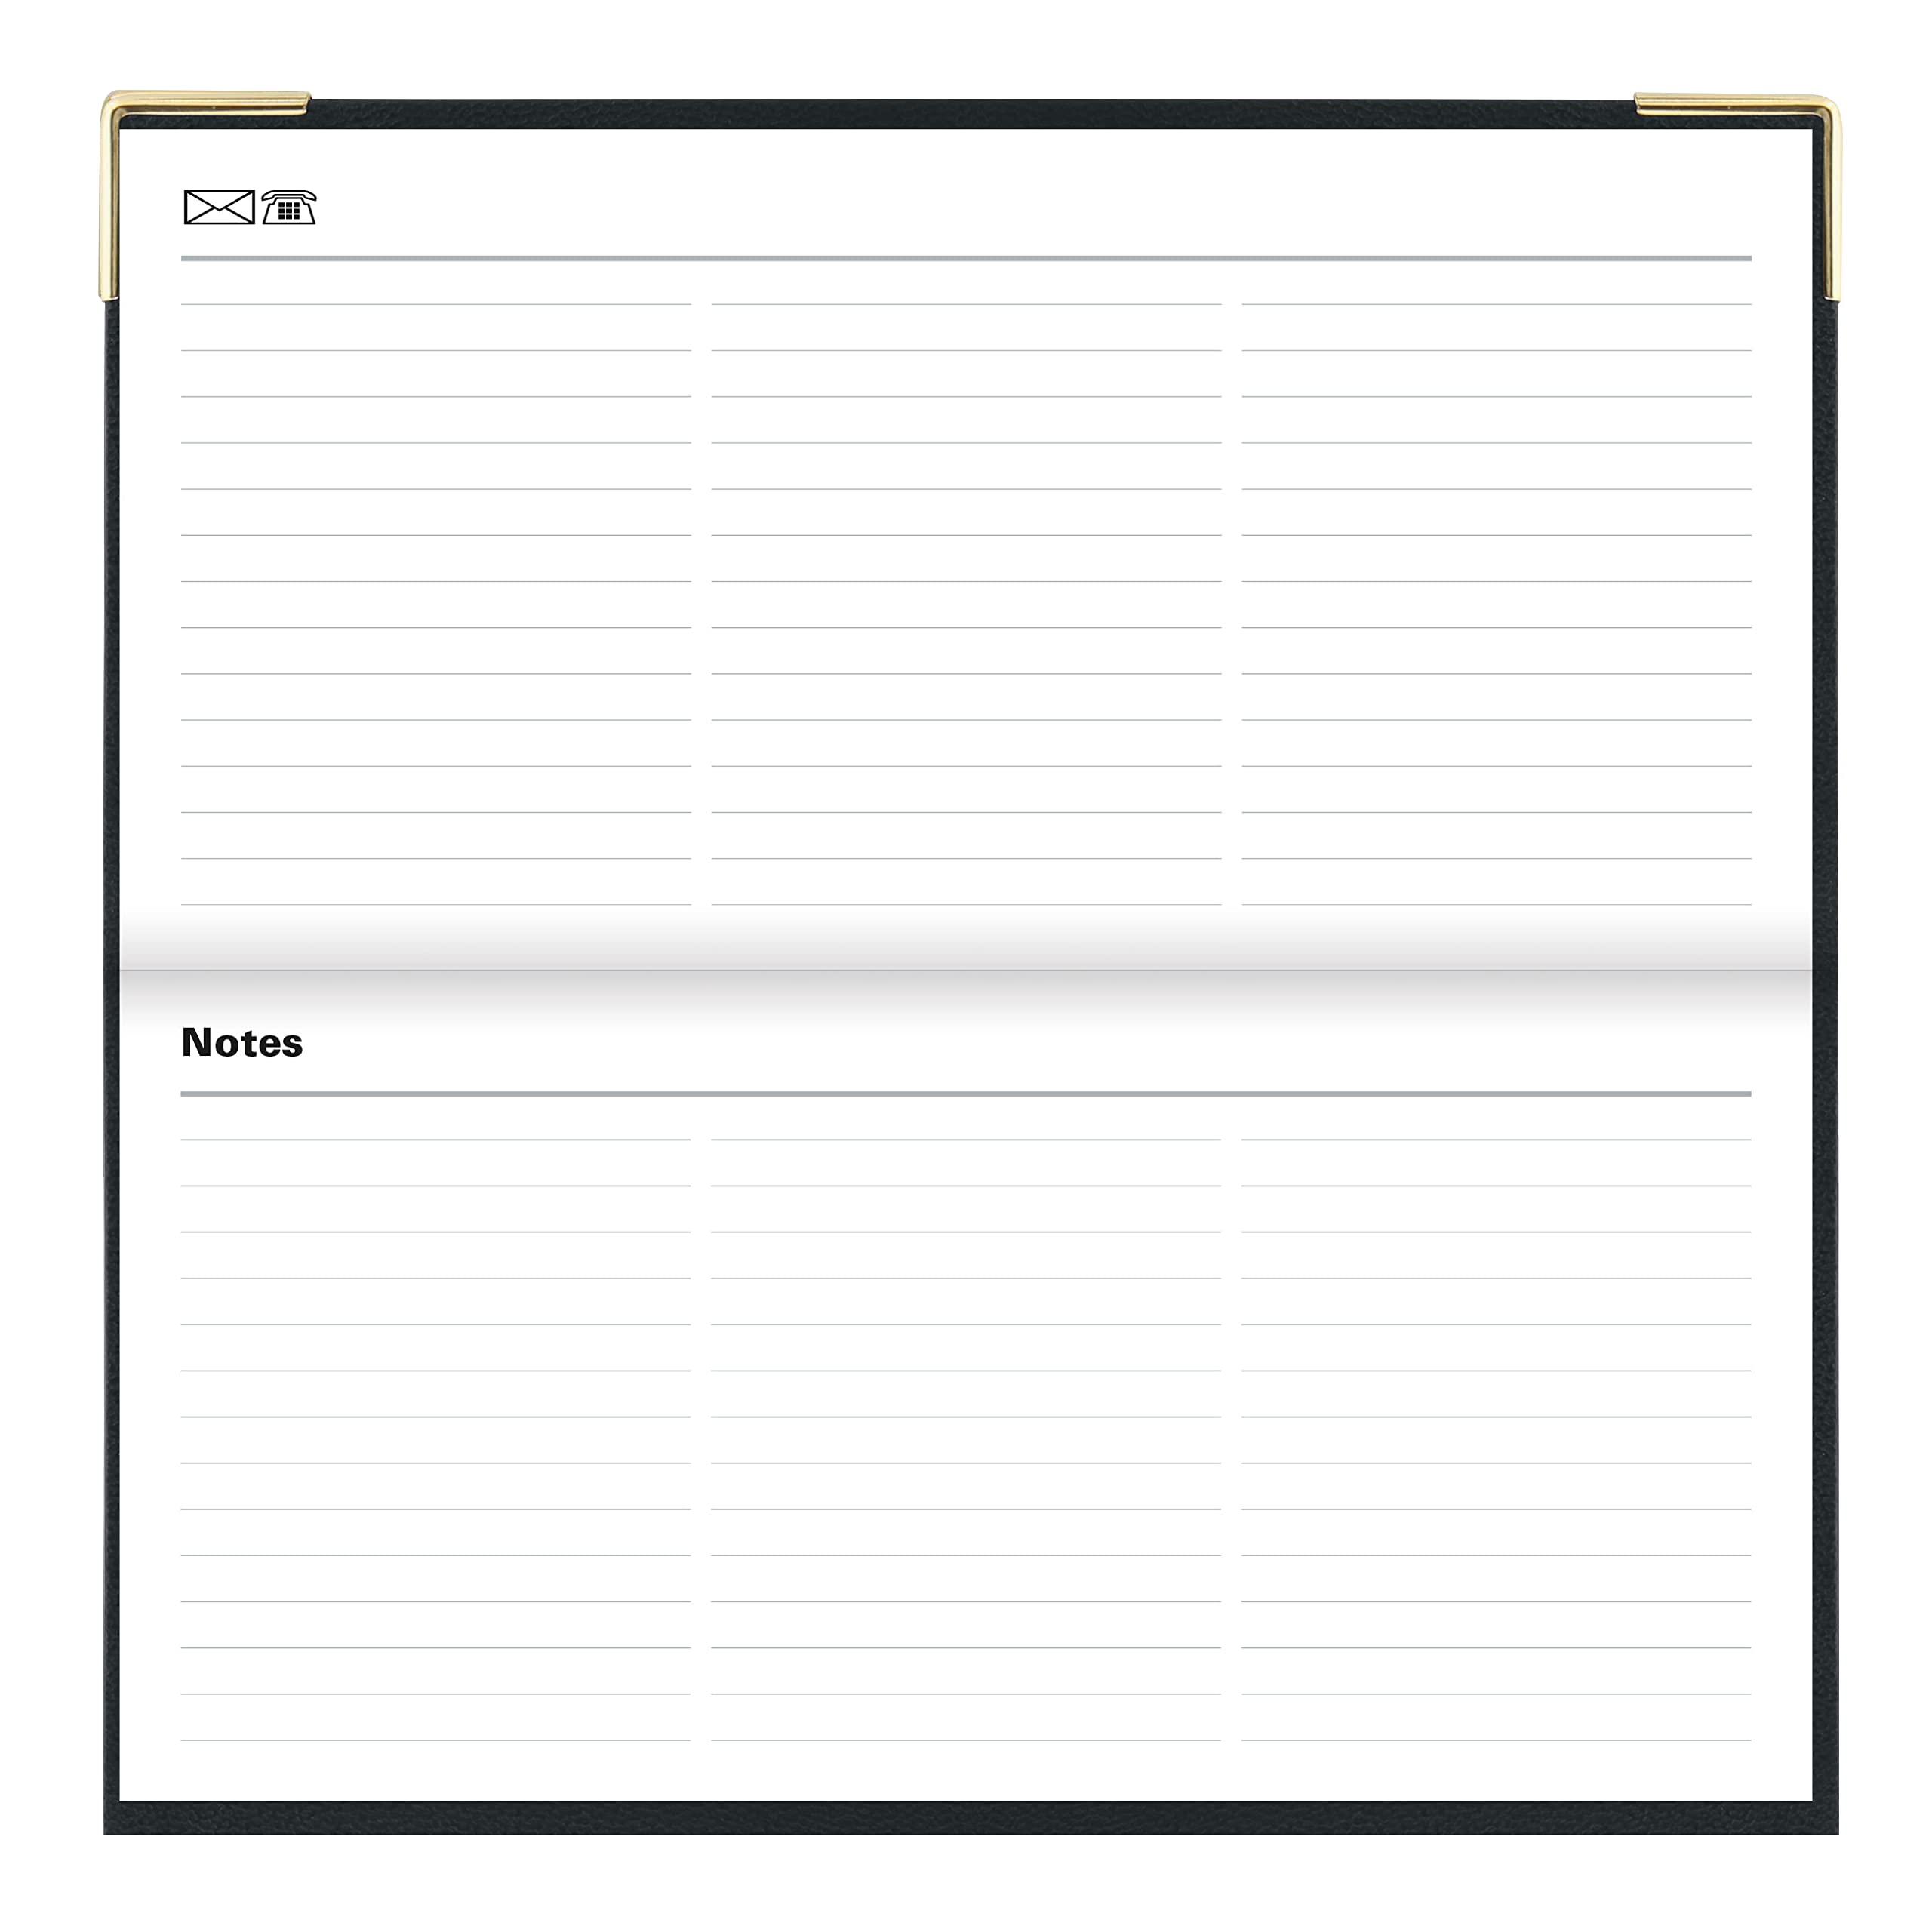 Letts Roma Monthly Planner, Slim Size, 13 Months, January 2023 to January 2024, Month-to-View, Horizontal, Gold Corners, 6.625" x 3.25", Black (C13SBK-23)